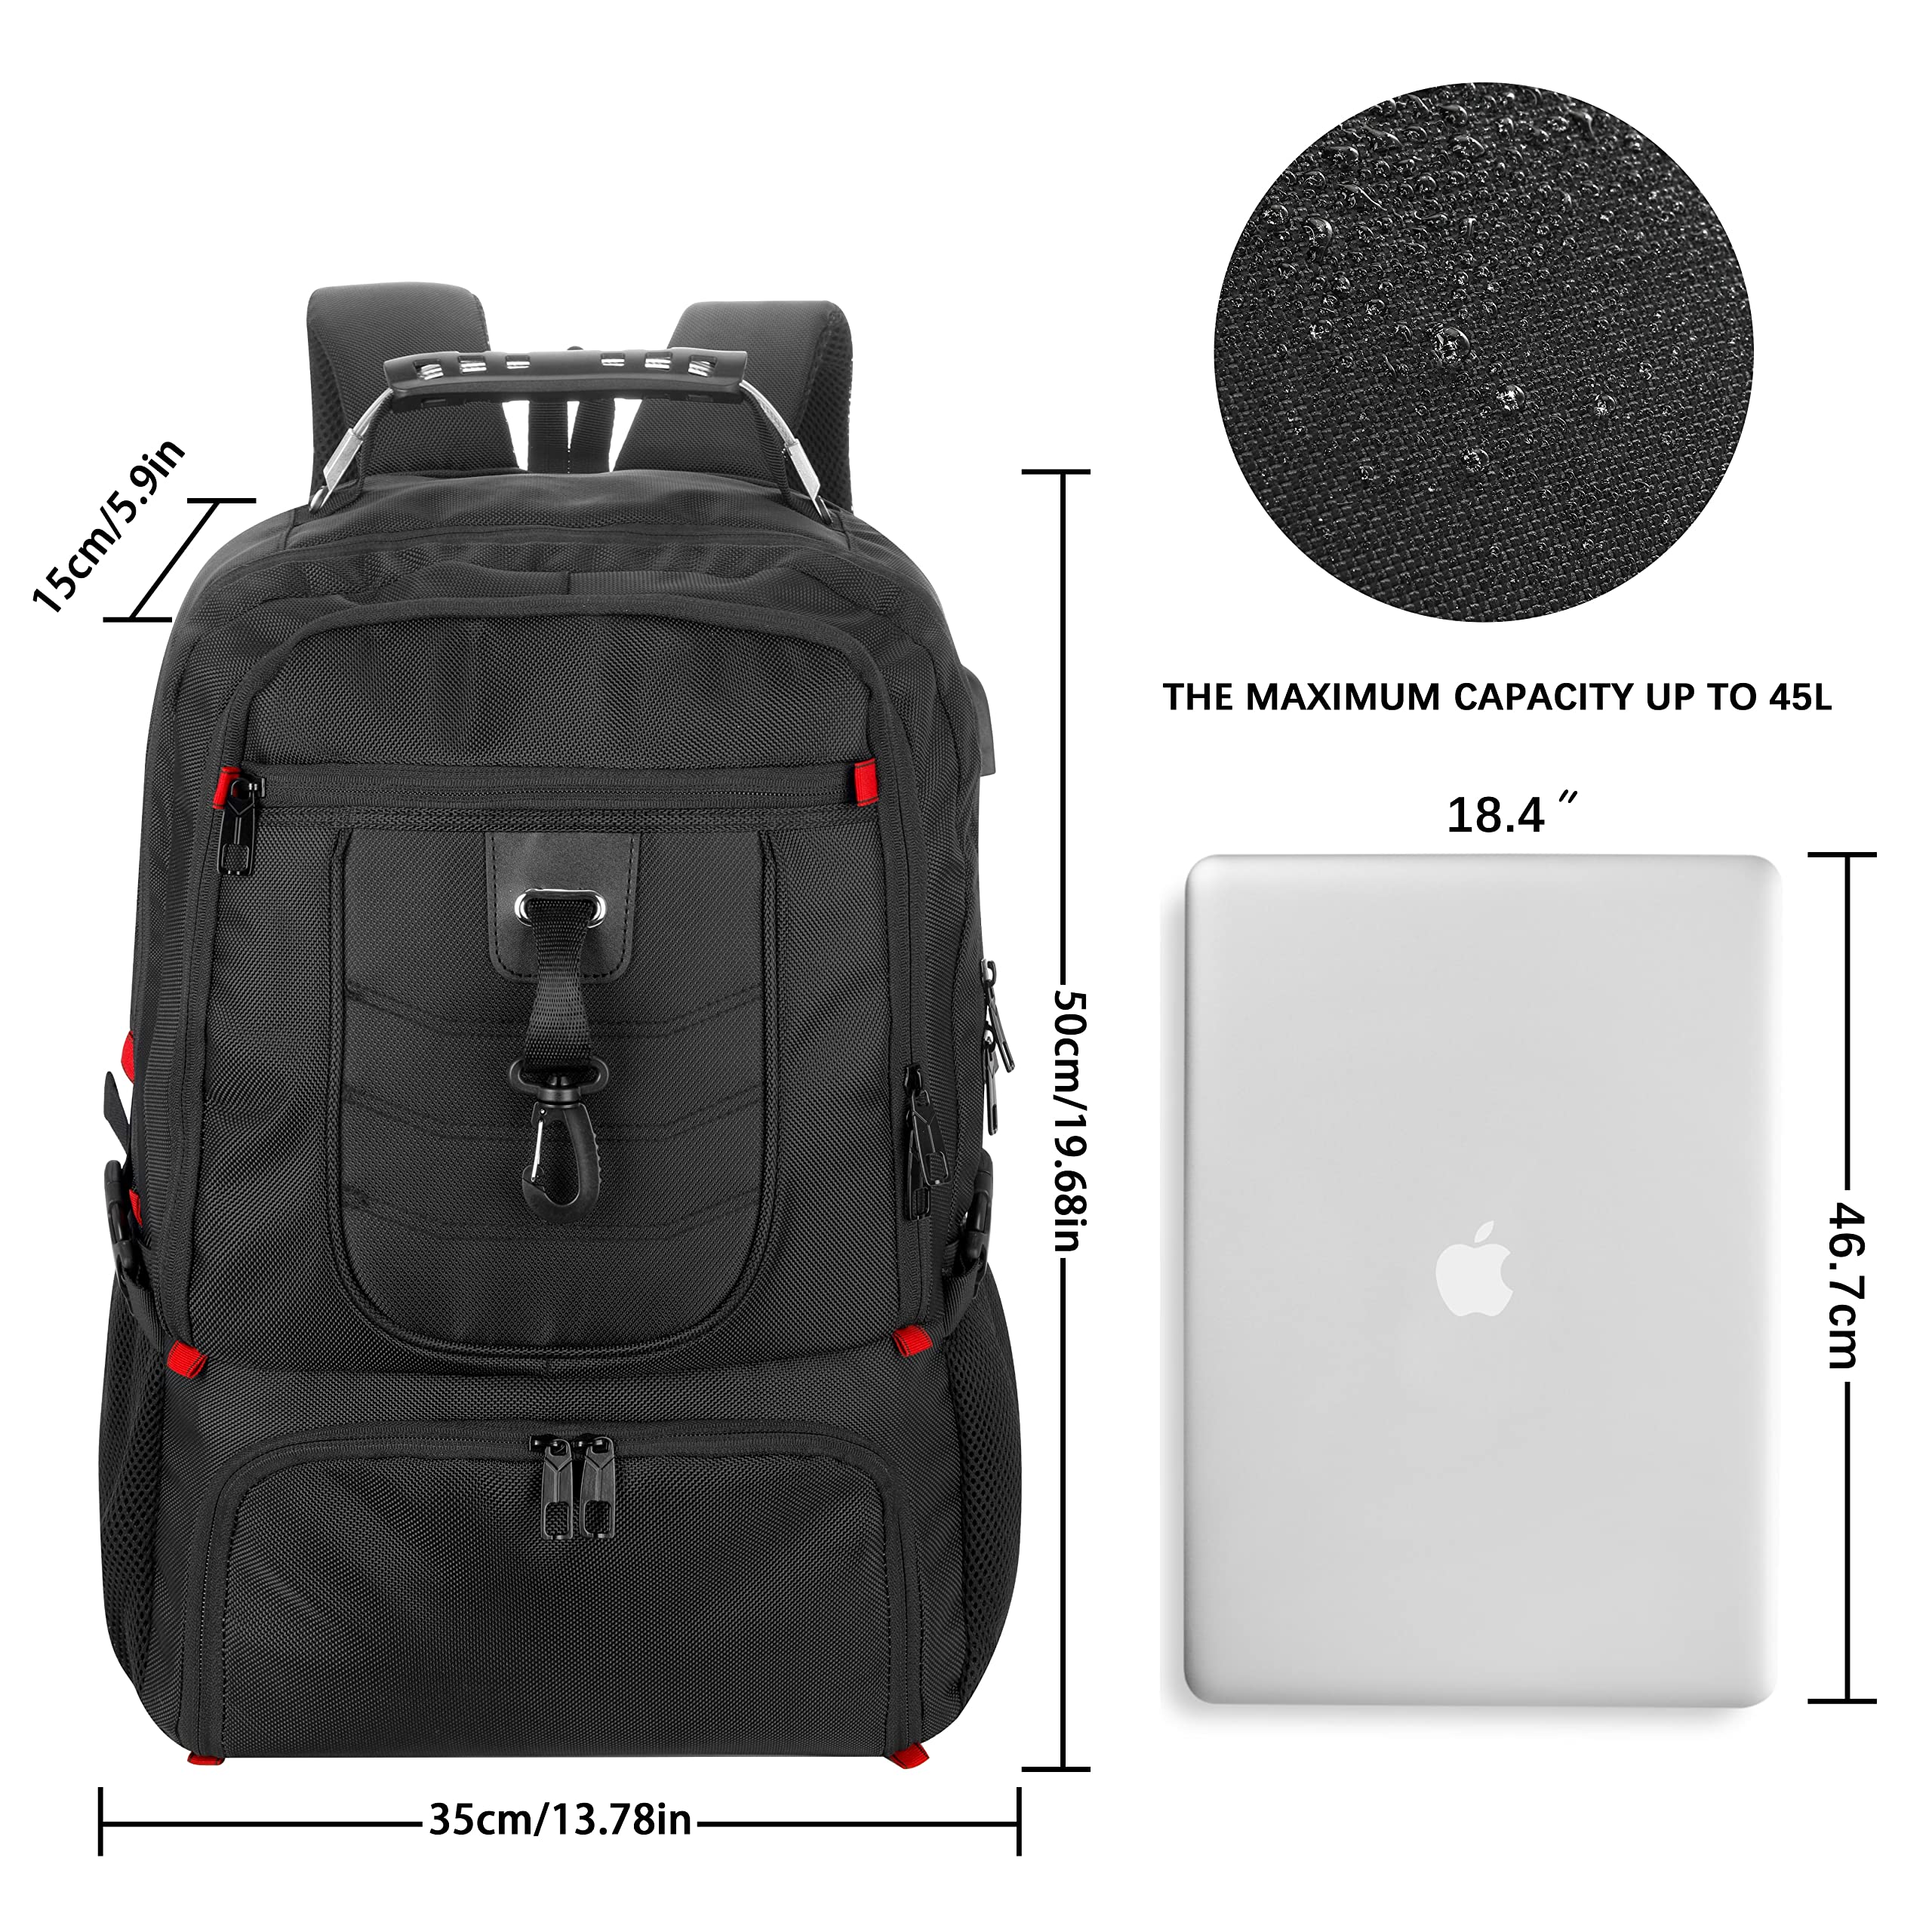 VESERI Travel Business Laptop Backpack for 18.4in PC with Shoe Compartment USB Charging Port,Sport Gym Bag for College Hiking Camping,Waterproof Bookbag School Backpack for Men Women Boys,Black